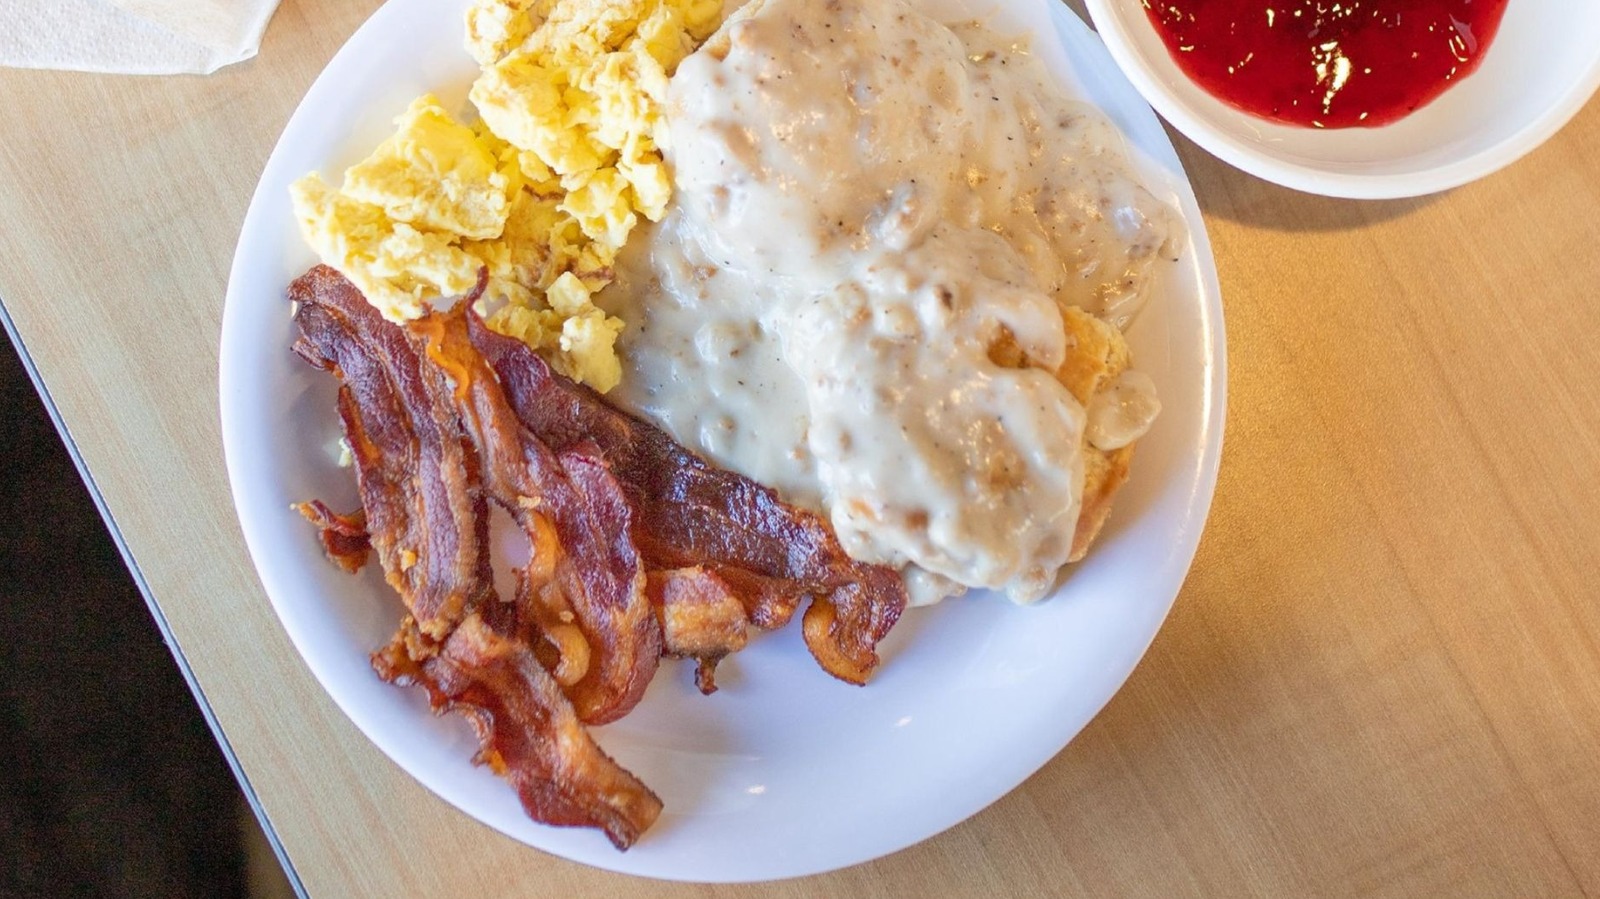 The Ultimate Guide To Golden Corral's Breakfast Menu